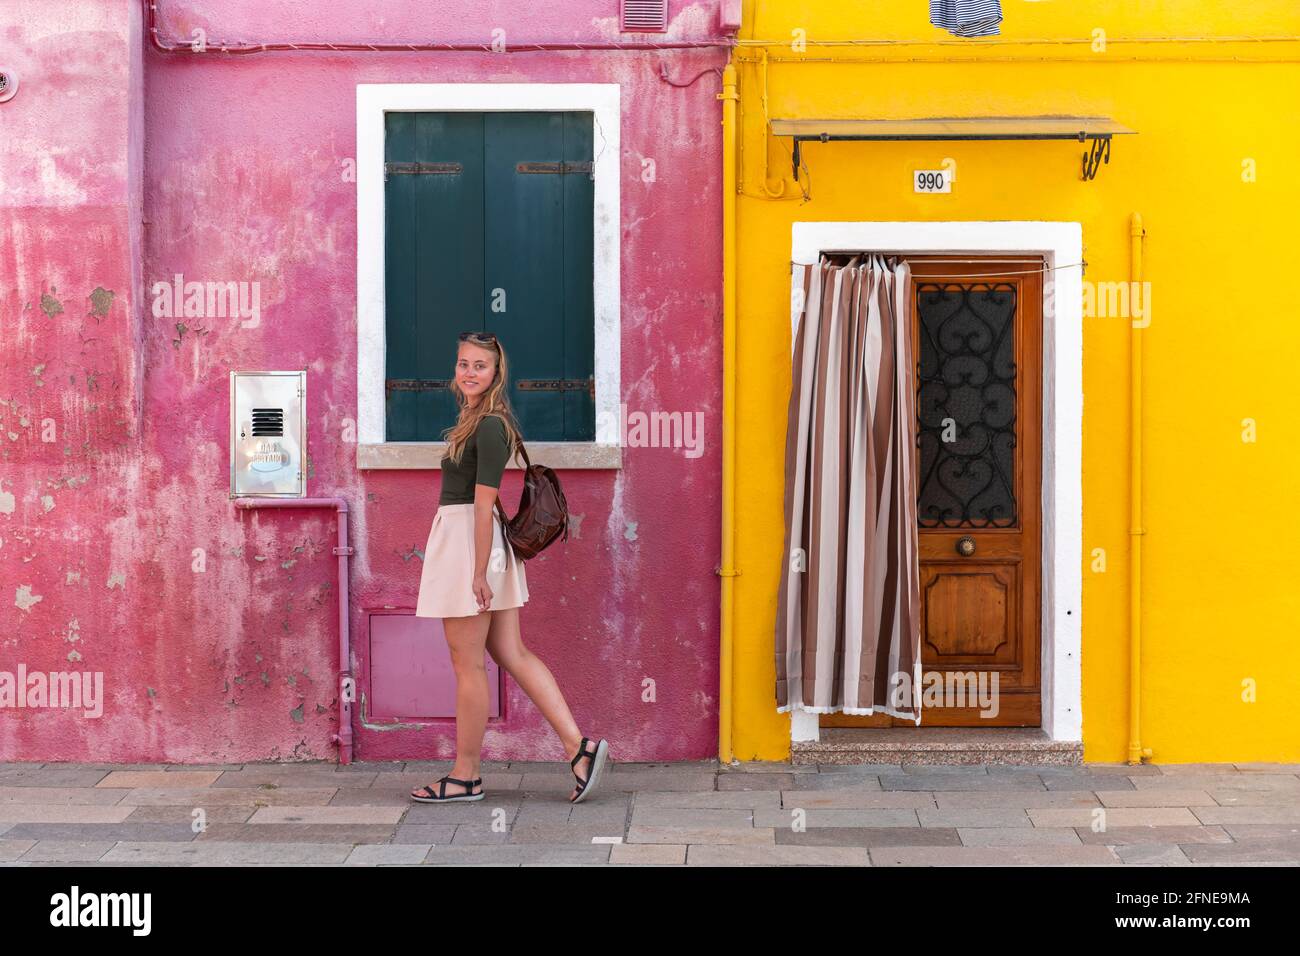 Young woman in front of colorful house, colorful house facades, tourist on Burano island, Venice, Veneto, Italy Stock Photo